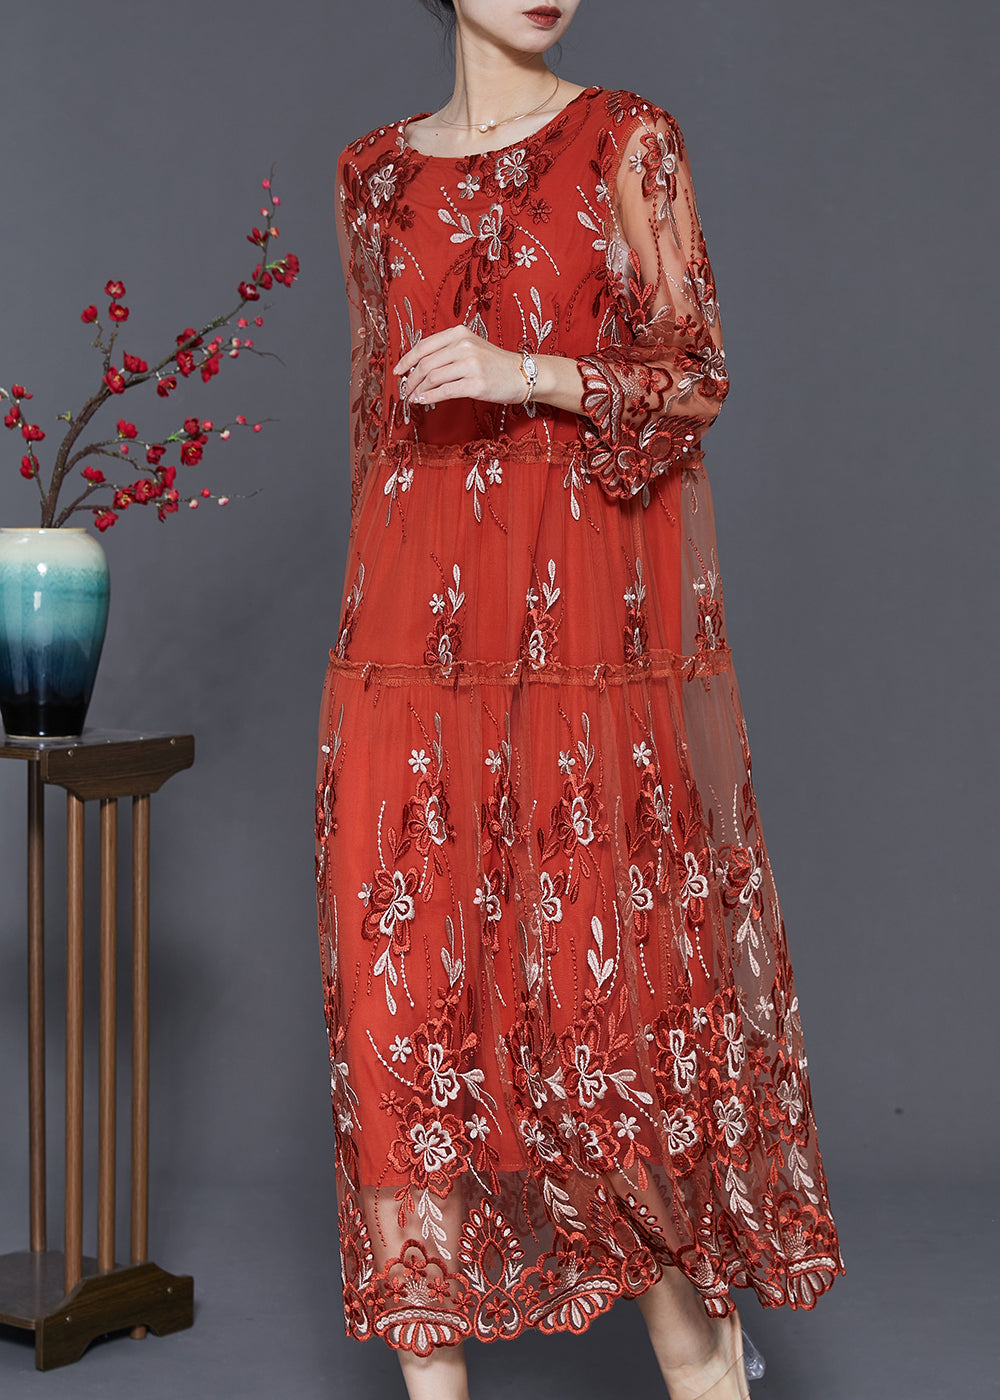 Brick Red Hollow Out Tulle Robe Dresses Embroidered Summer